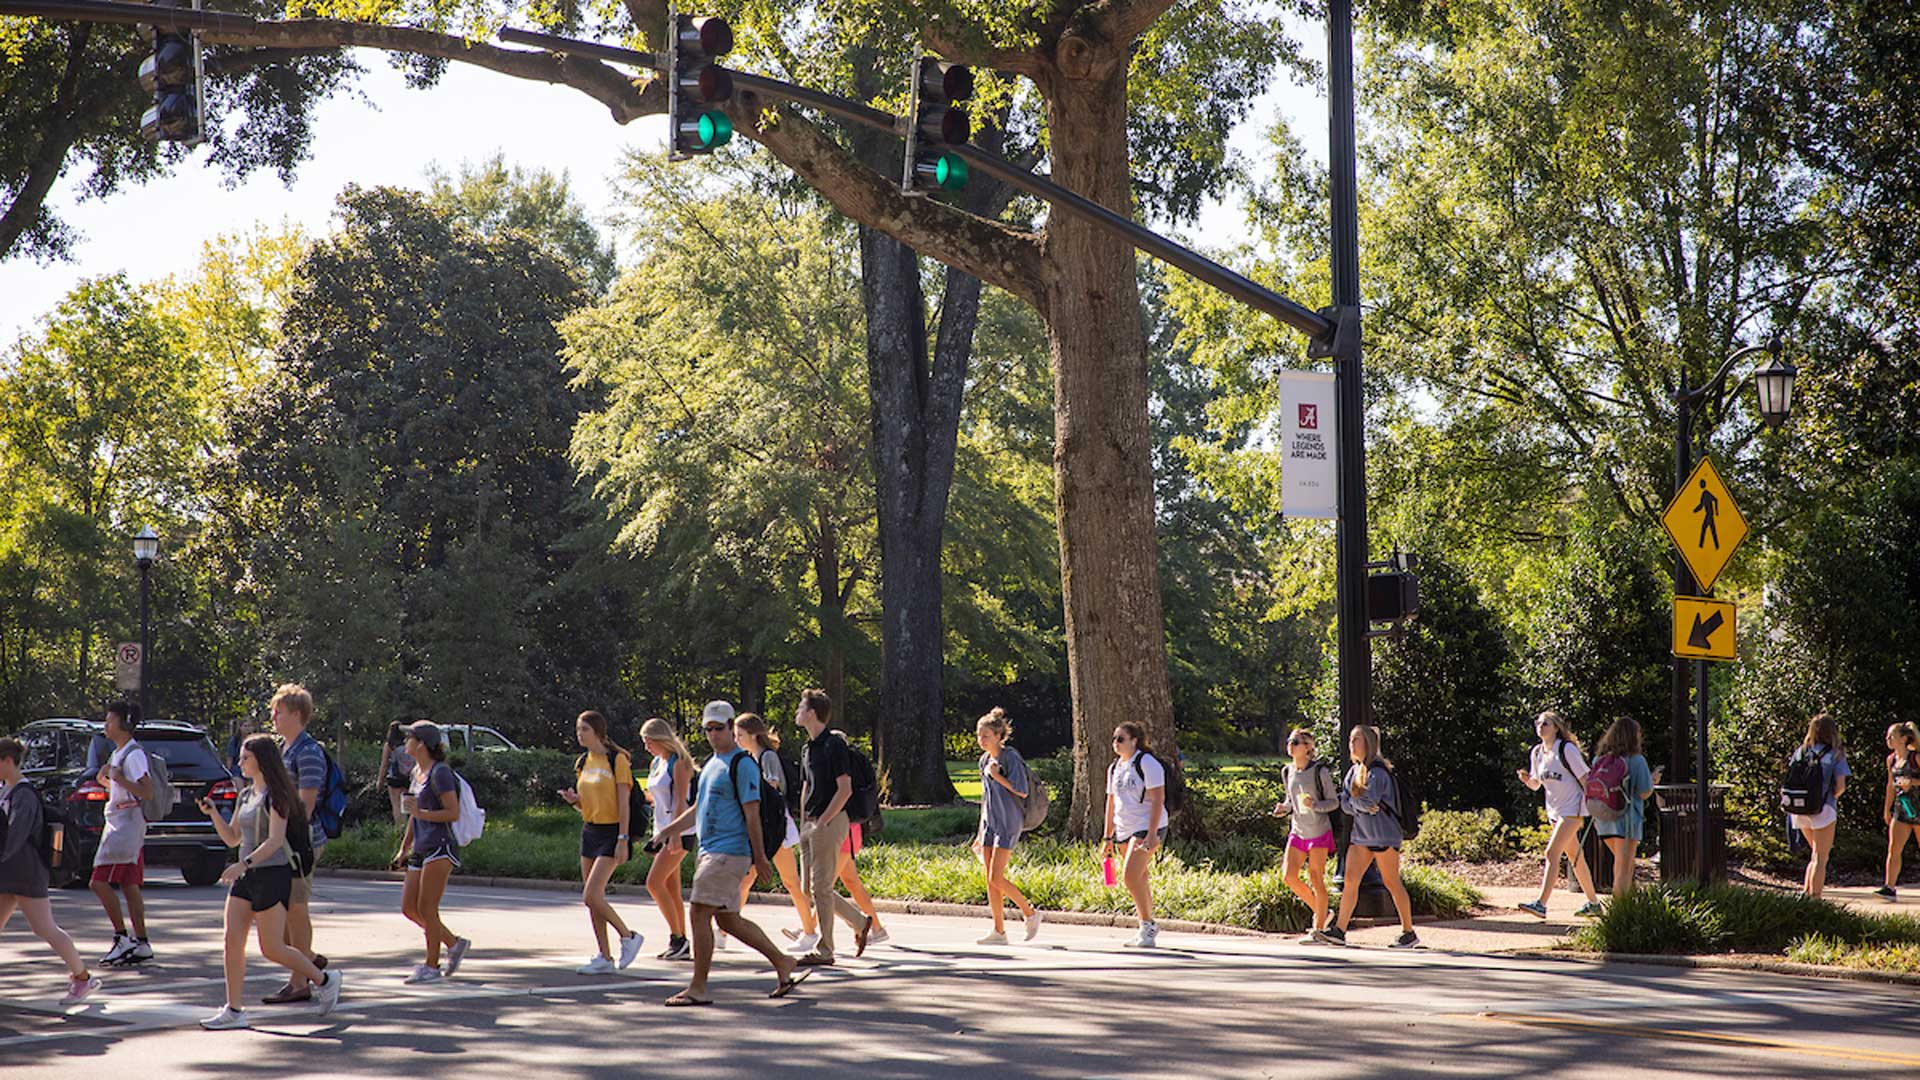 Students walk across the street on a summer day.